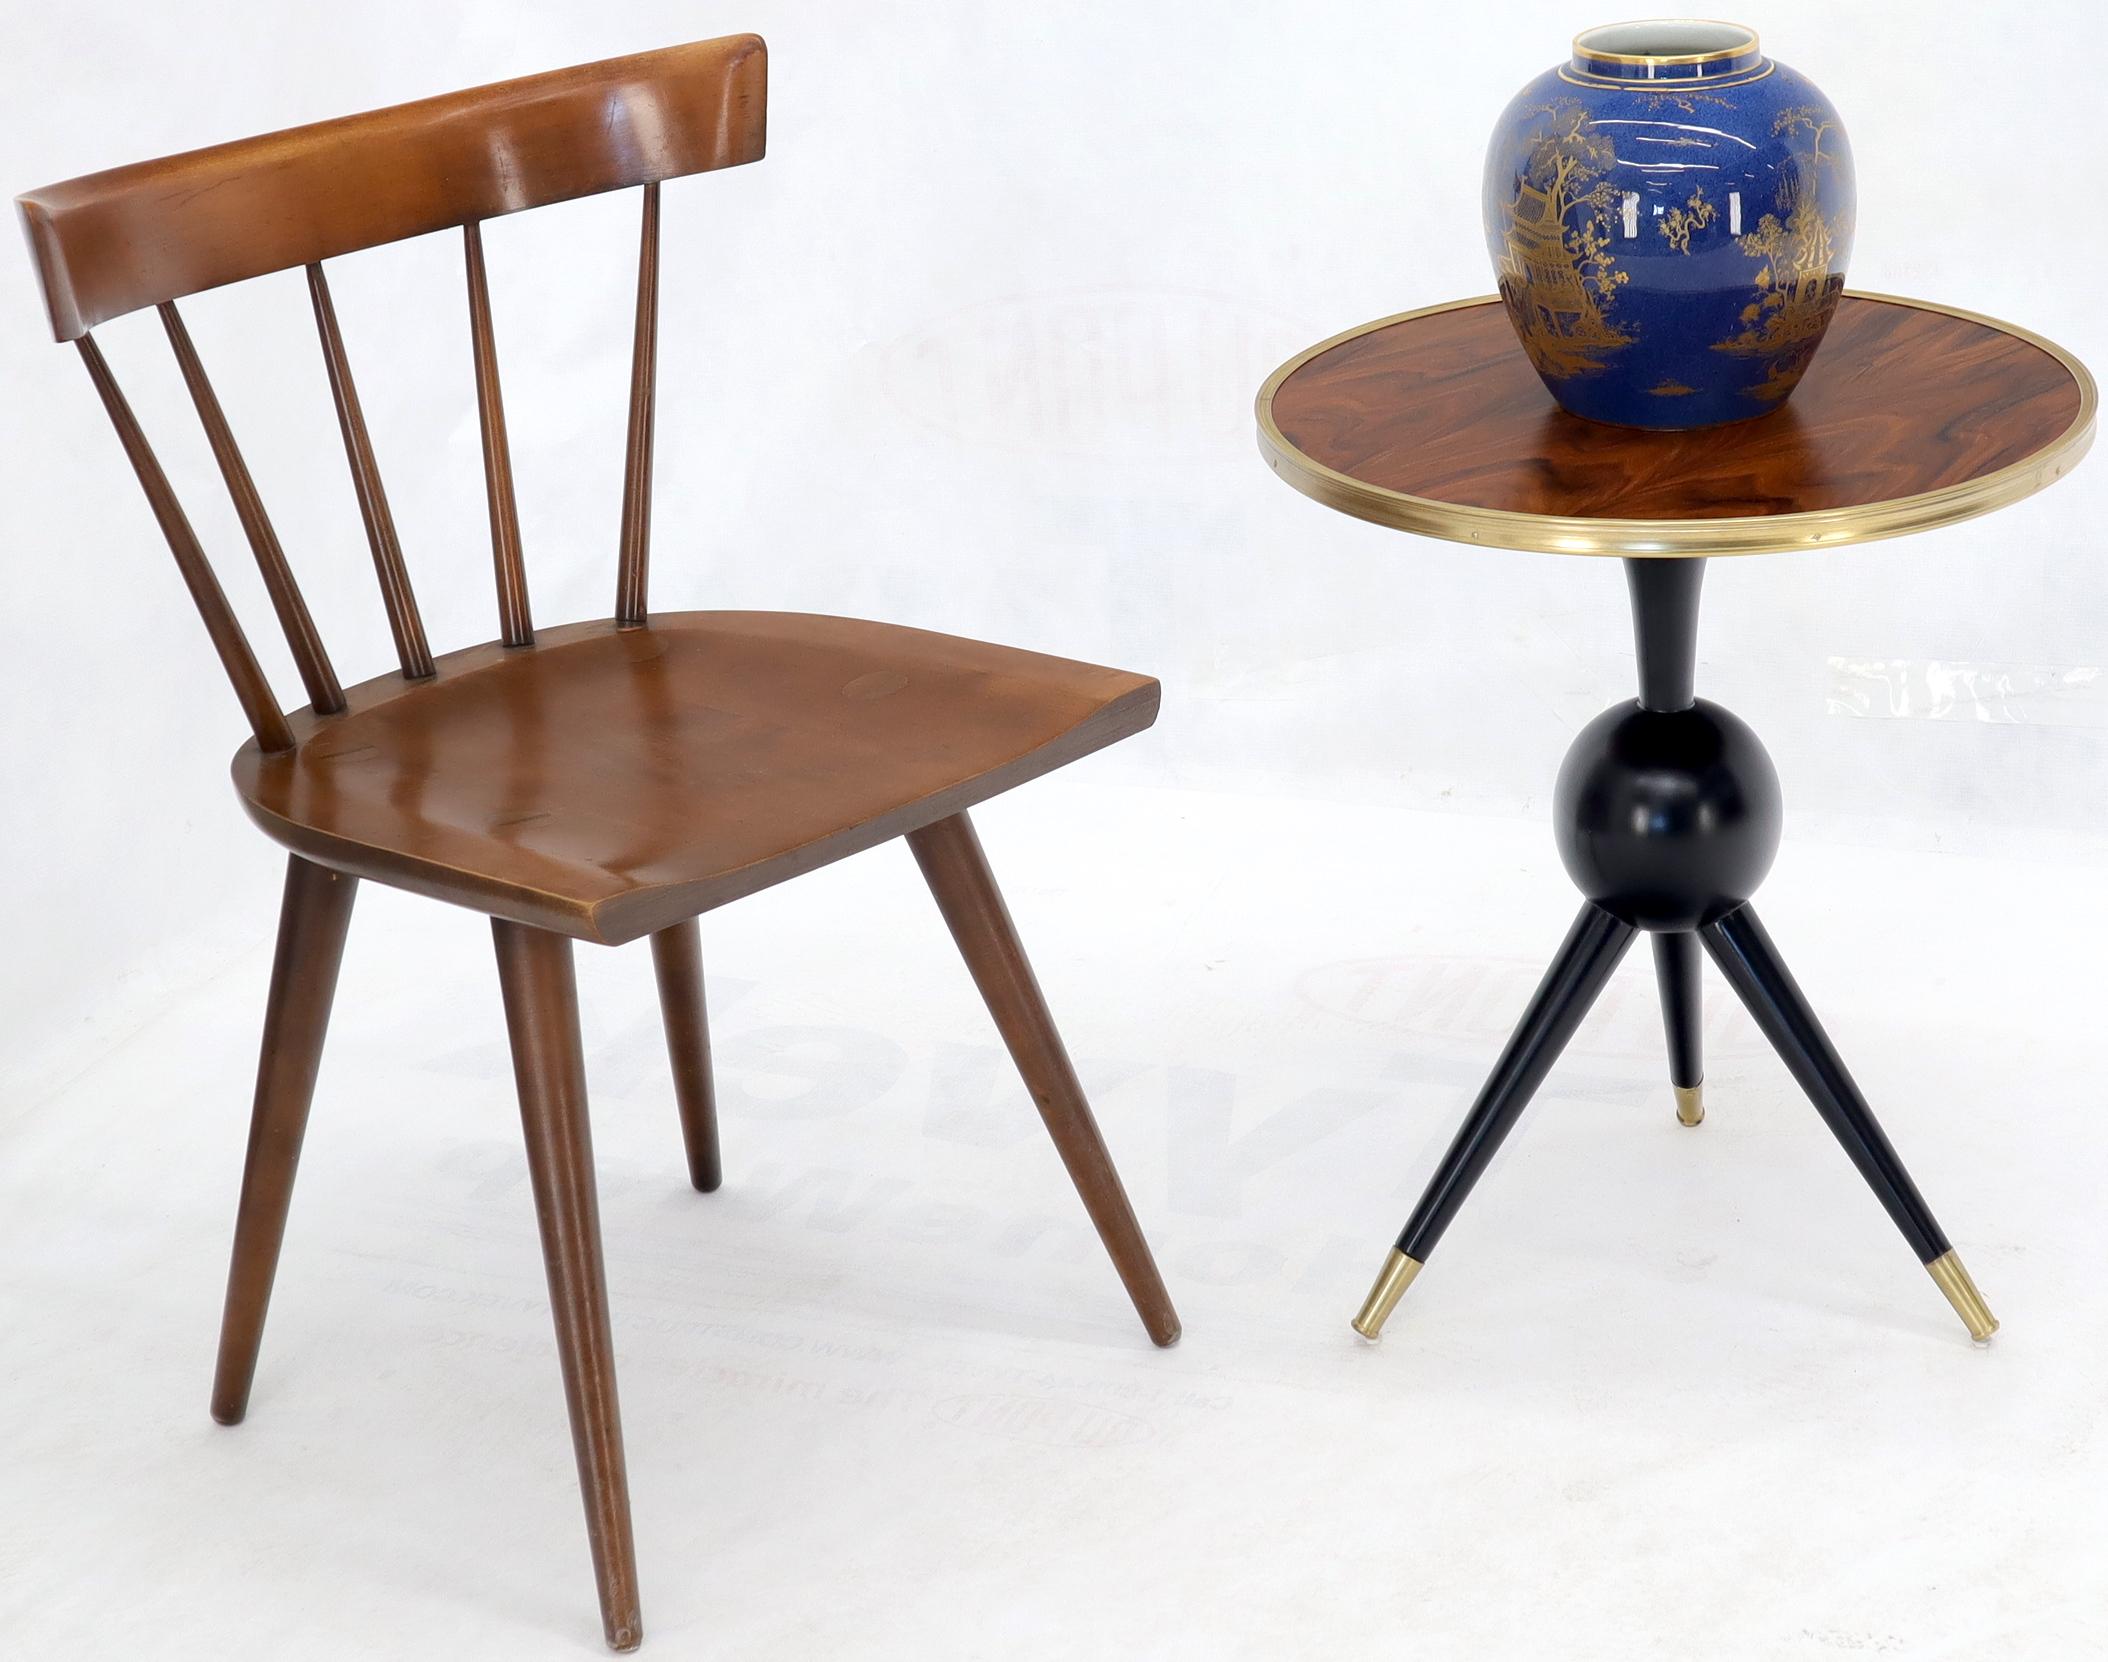 Abonized tapered leg tripod bases round rosewood tops side Italian Mid-Century Modern side end occasional tables or stands. Gio Ponti and Paulo Buffa era.